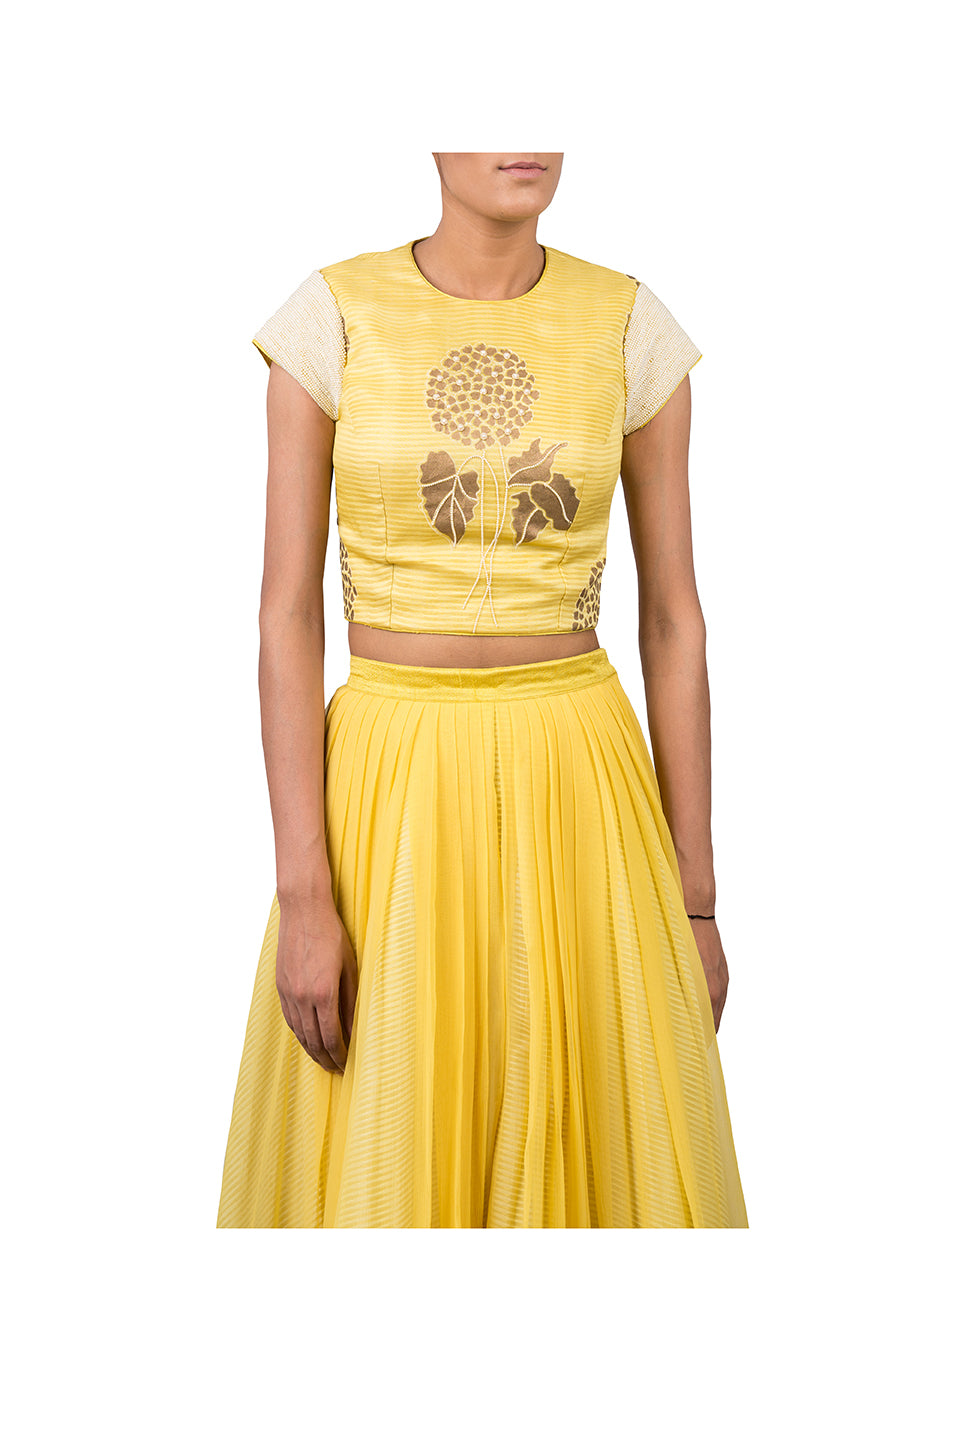 BLOCK PRINTED FOOTBALL LILLY HIGHLIGHTED CROPTOP WITH CHIFFON PLEATED PALAZZO